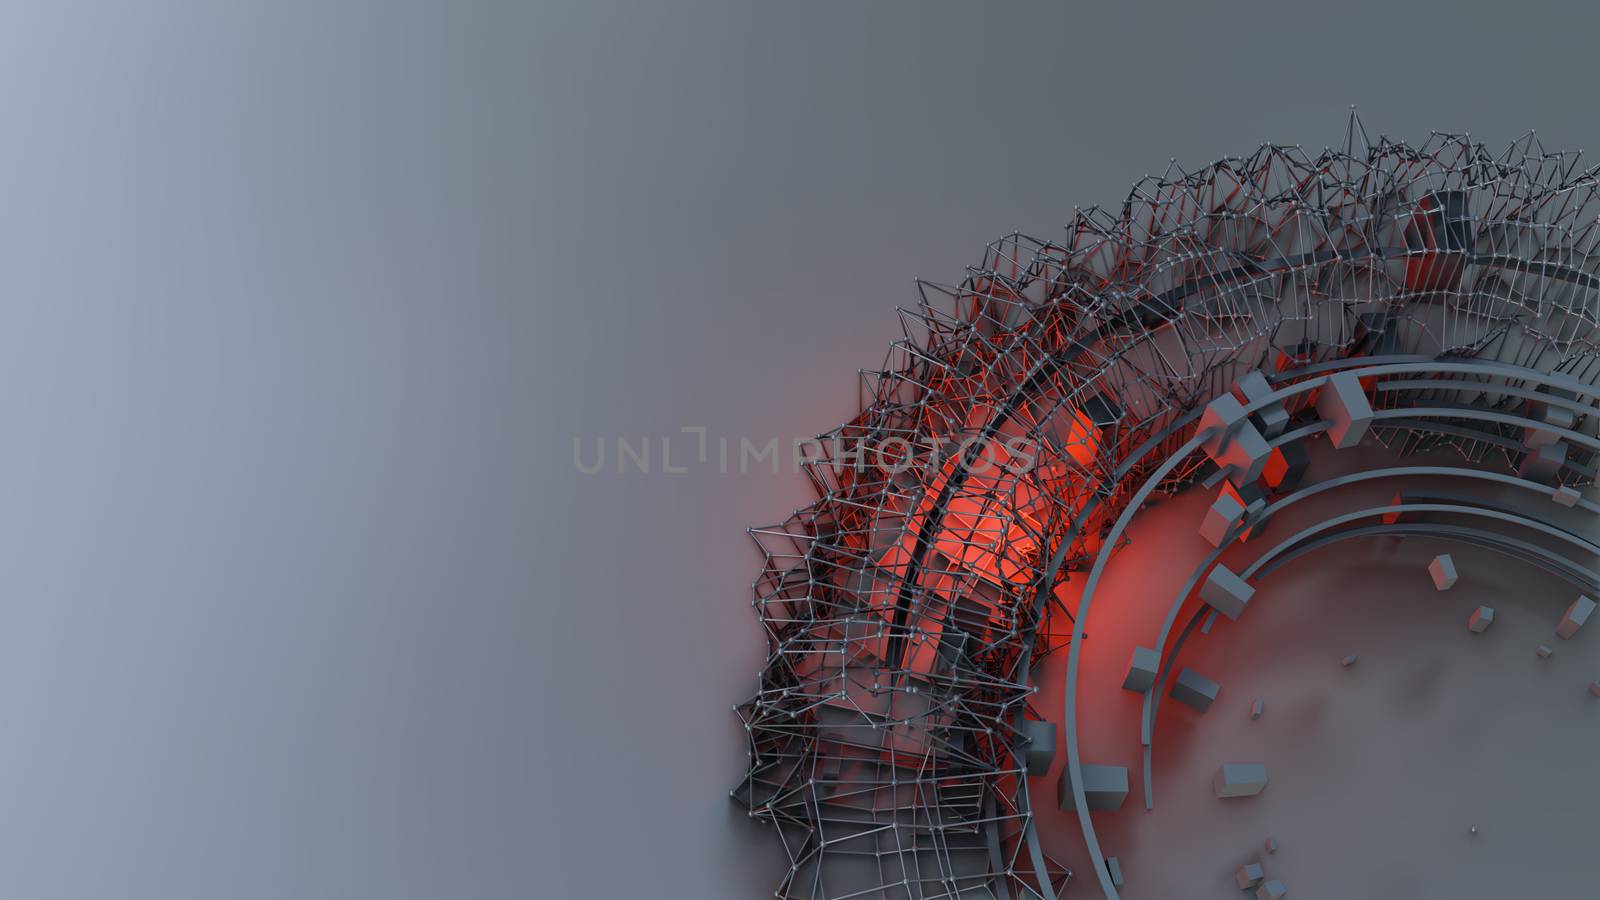 Abstract 3D rendering of chaotic objects. Concept Design Abstract Architecture or Space Station